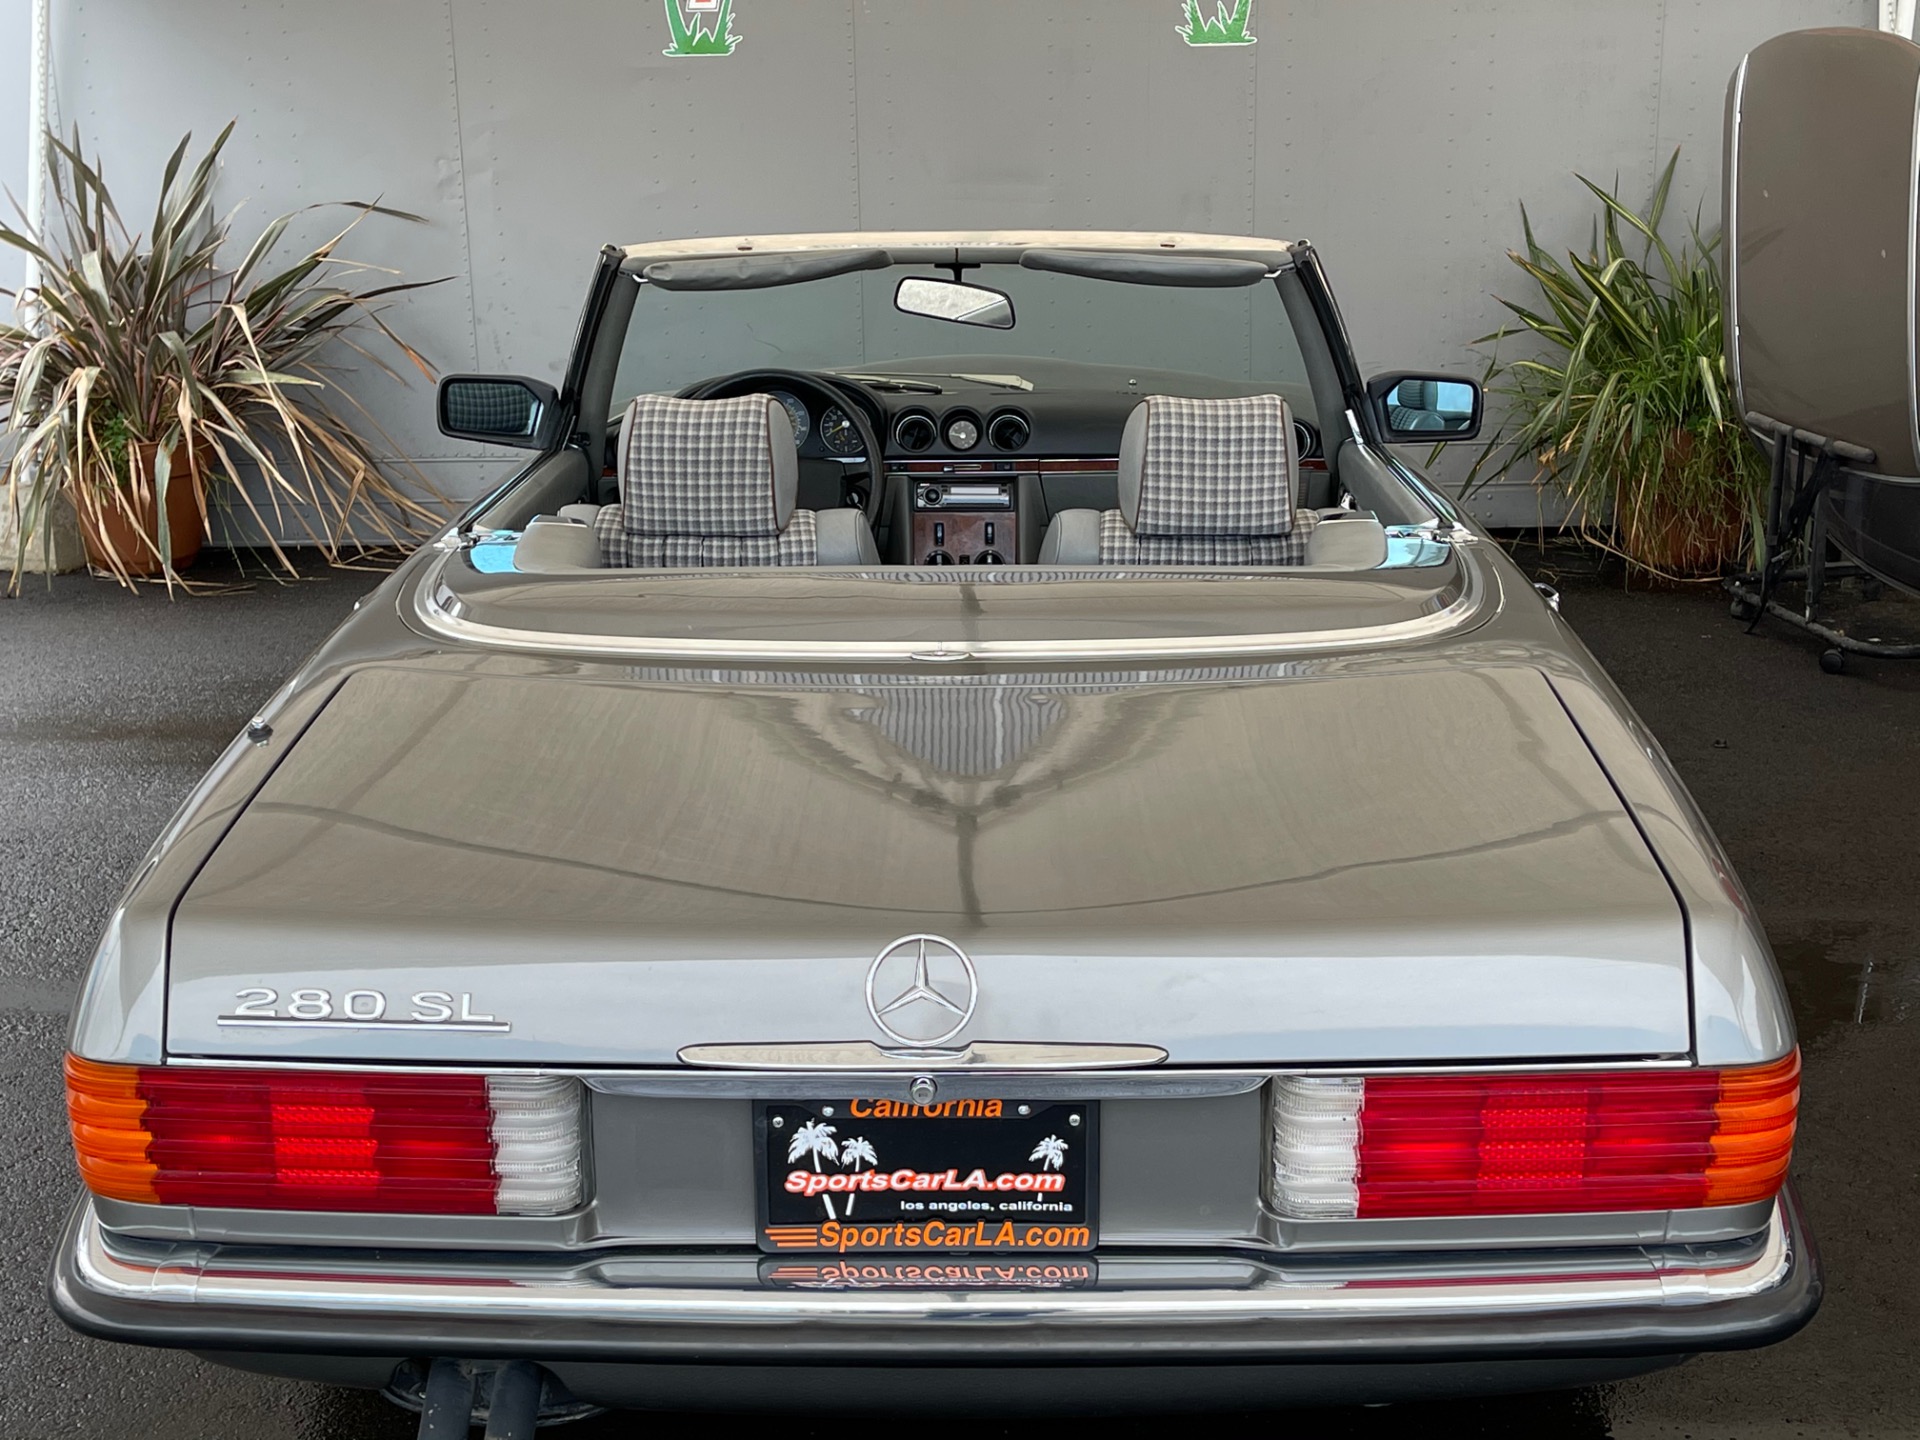 Used 1984 Mercedes Benz 280 Class 280 SL